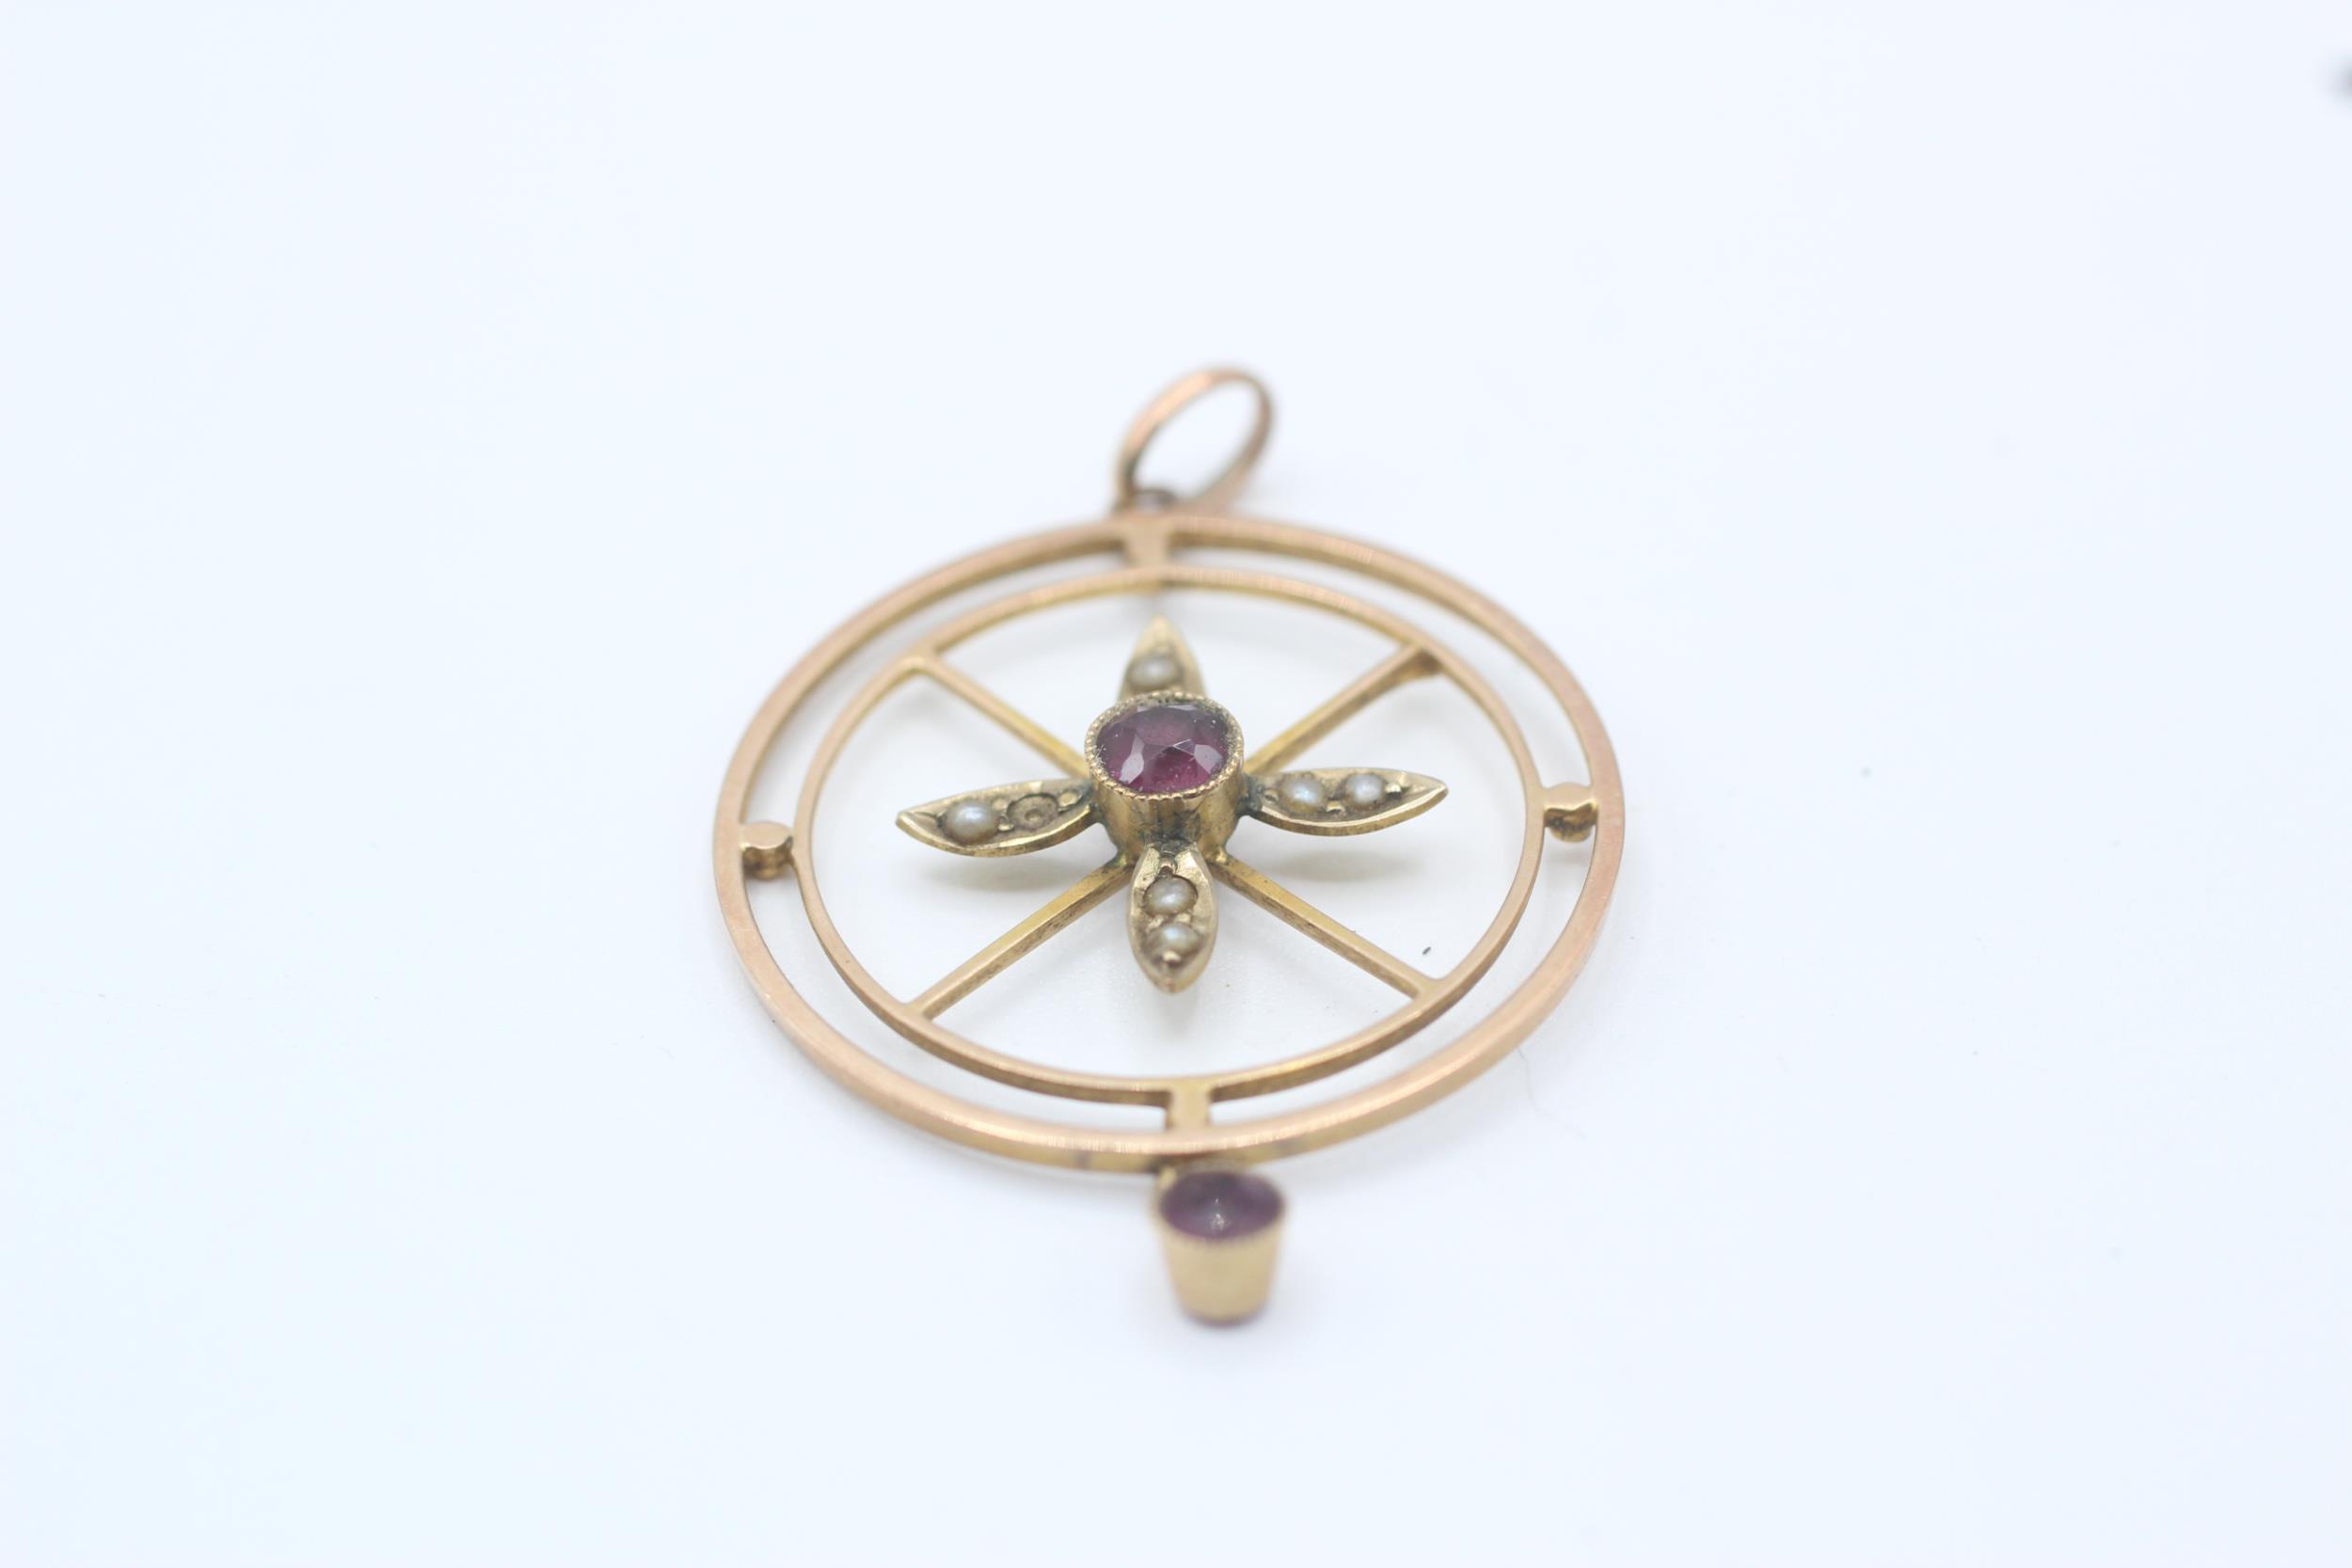 9ct gold antique garnet & seed pearl pendant - 92 g - Image 4 of 4